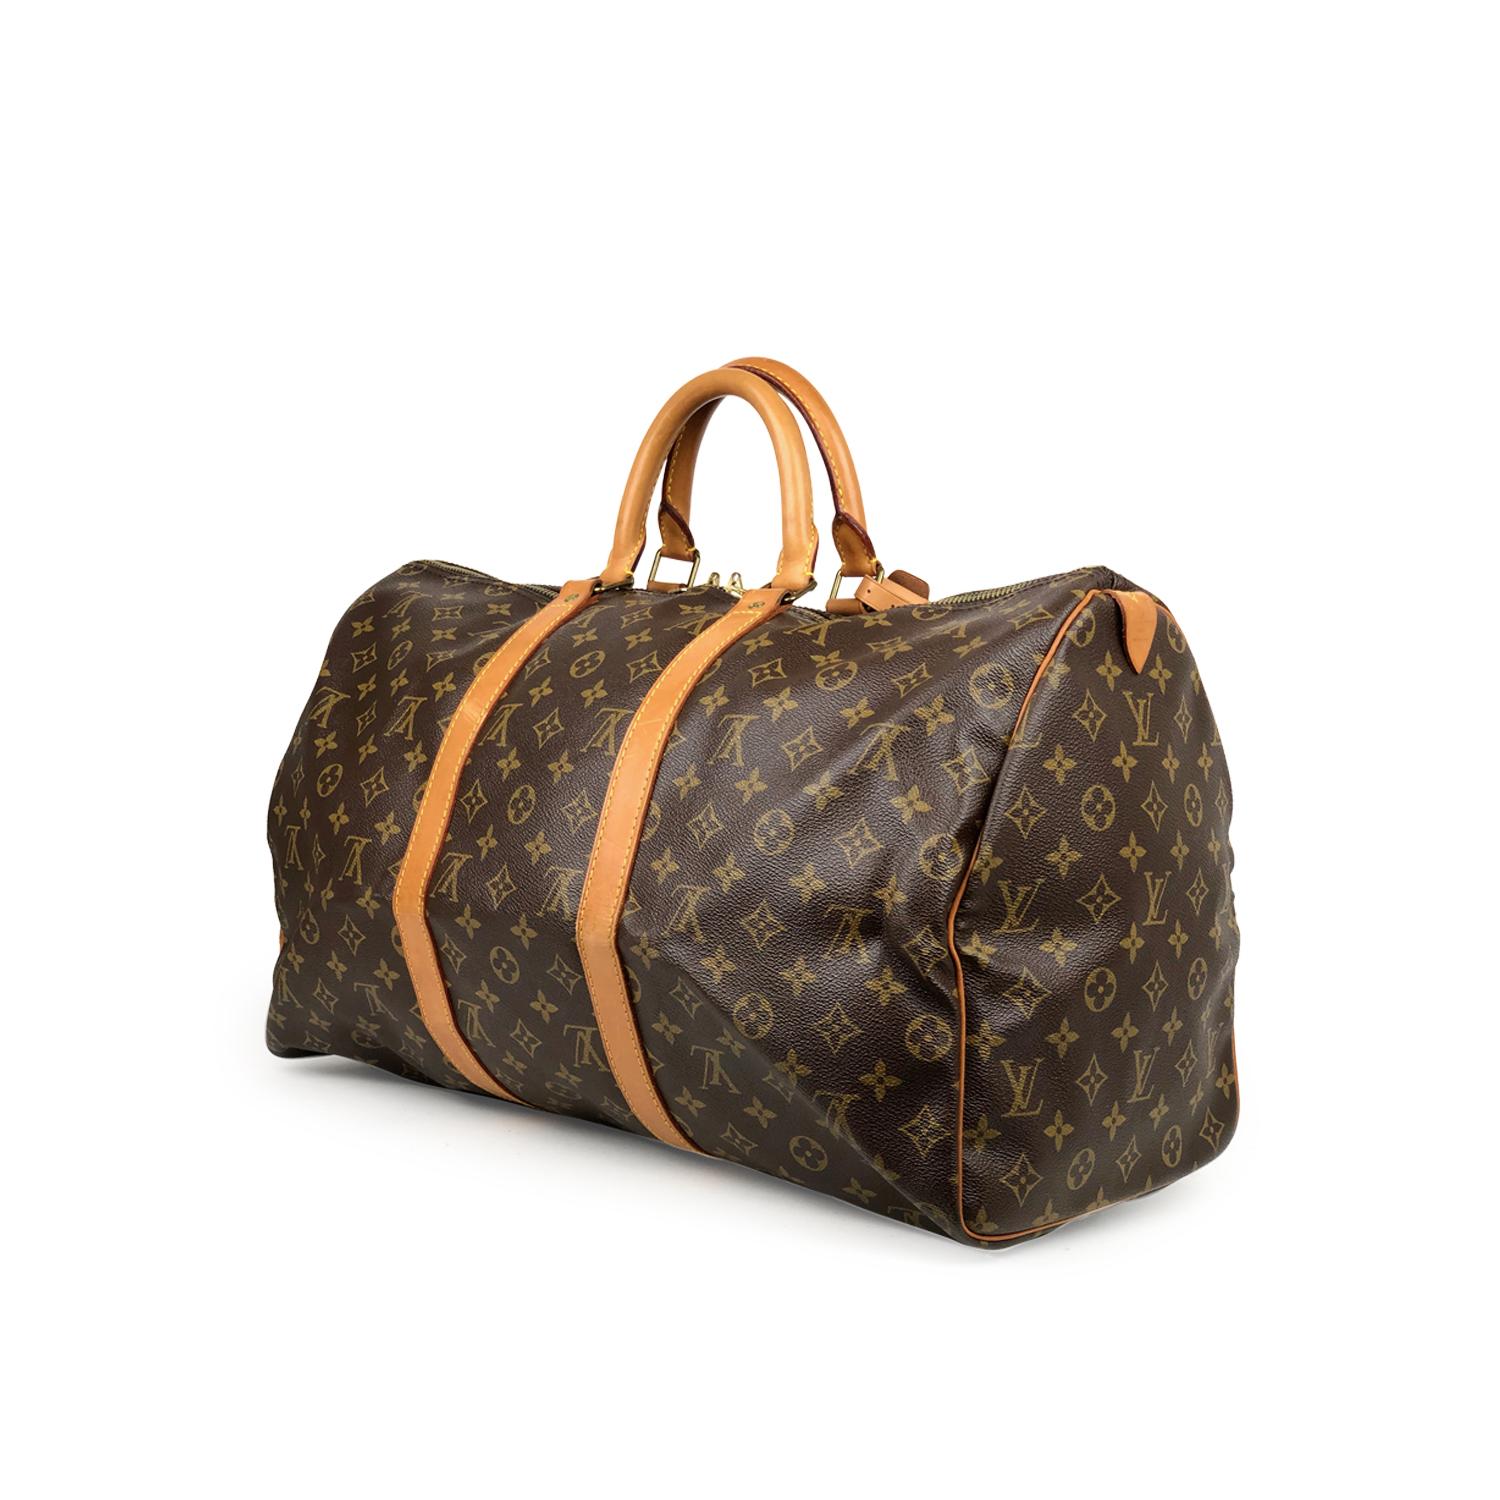 Louis Vuitton Keepall 50 Brown Monogram Weekend Bag In Good Condition For Sale In Sundbyberg, SE